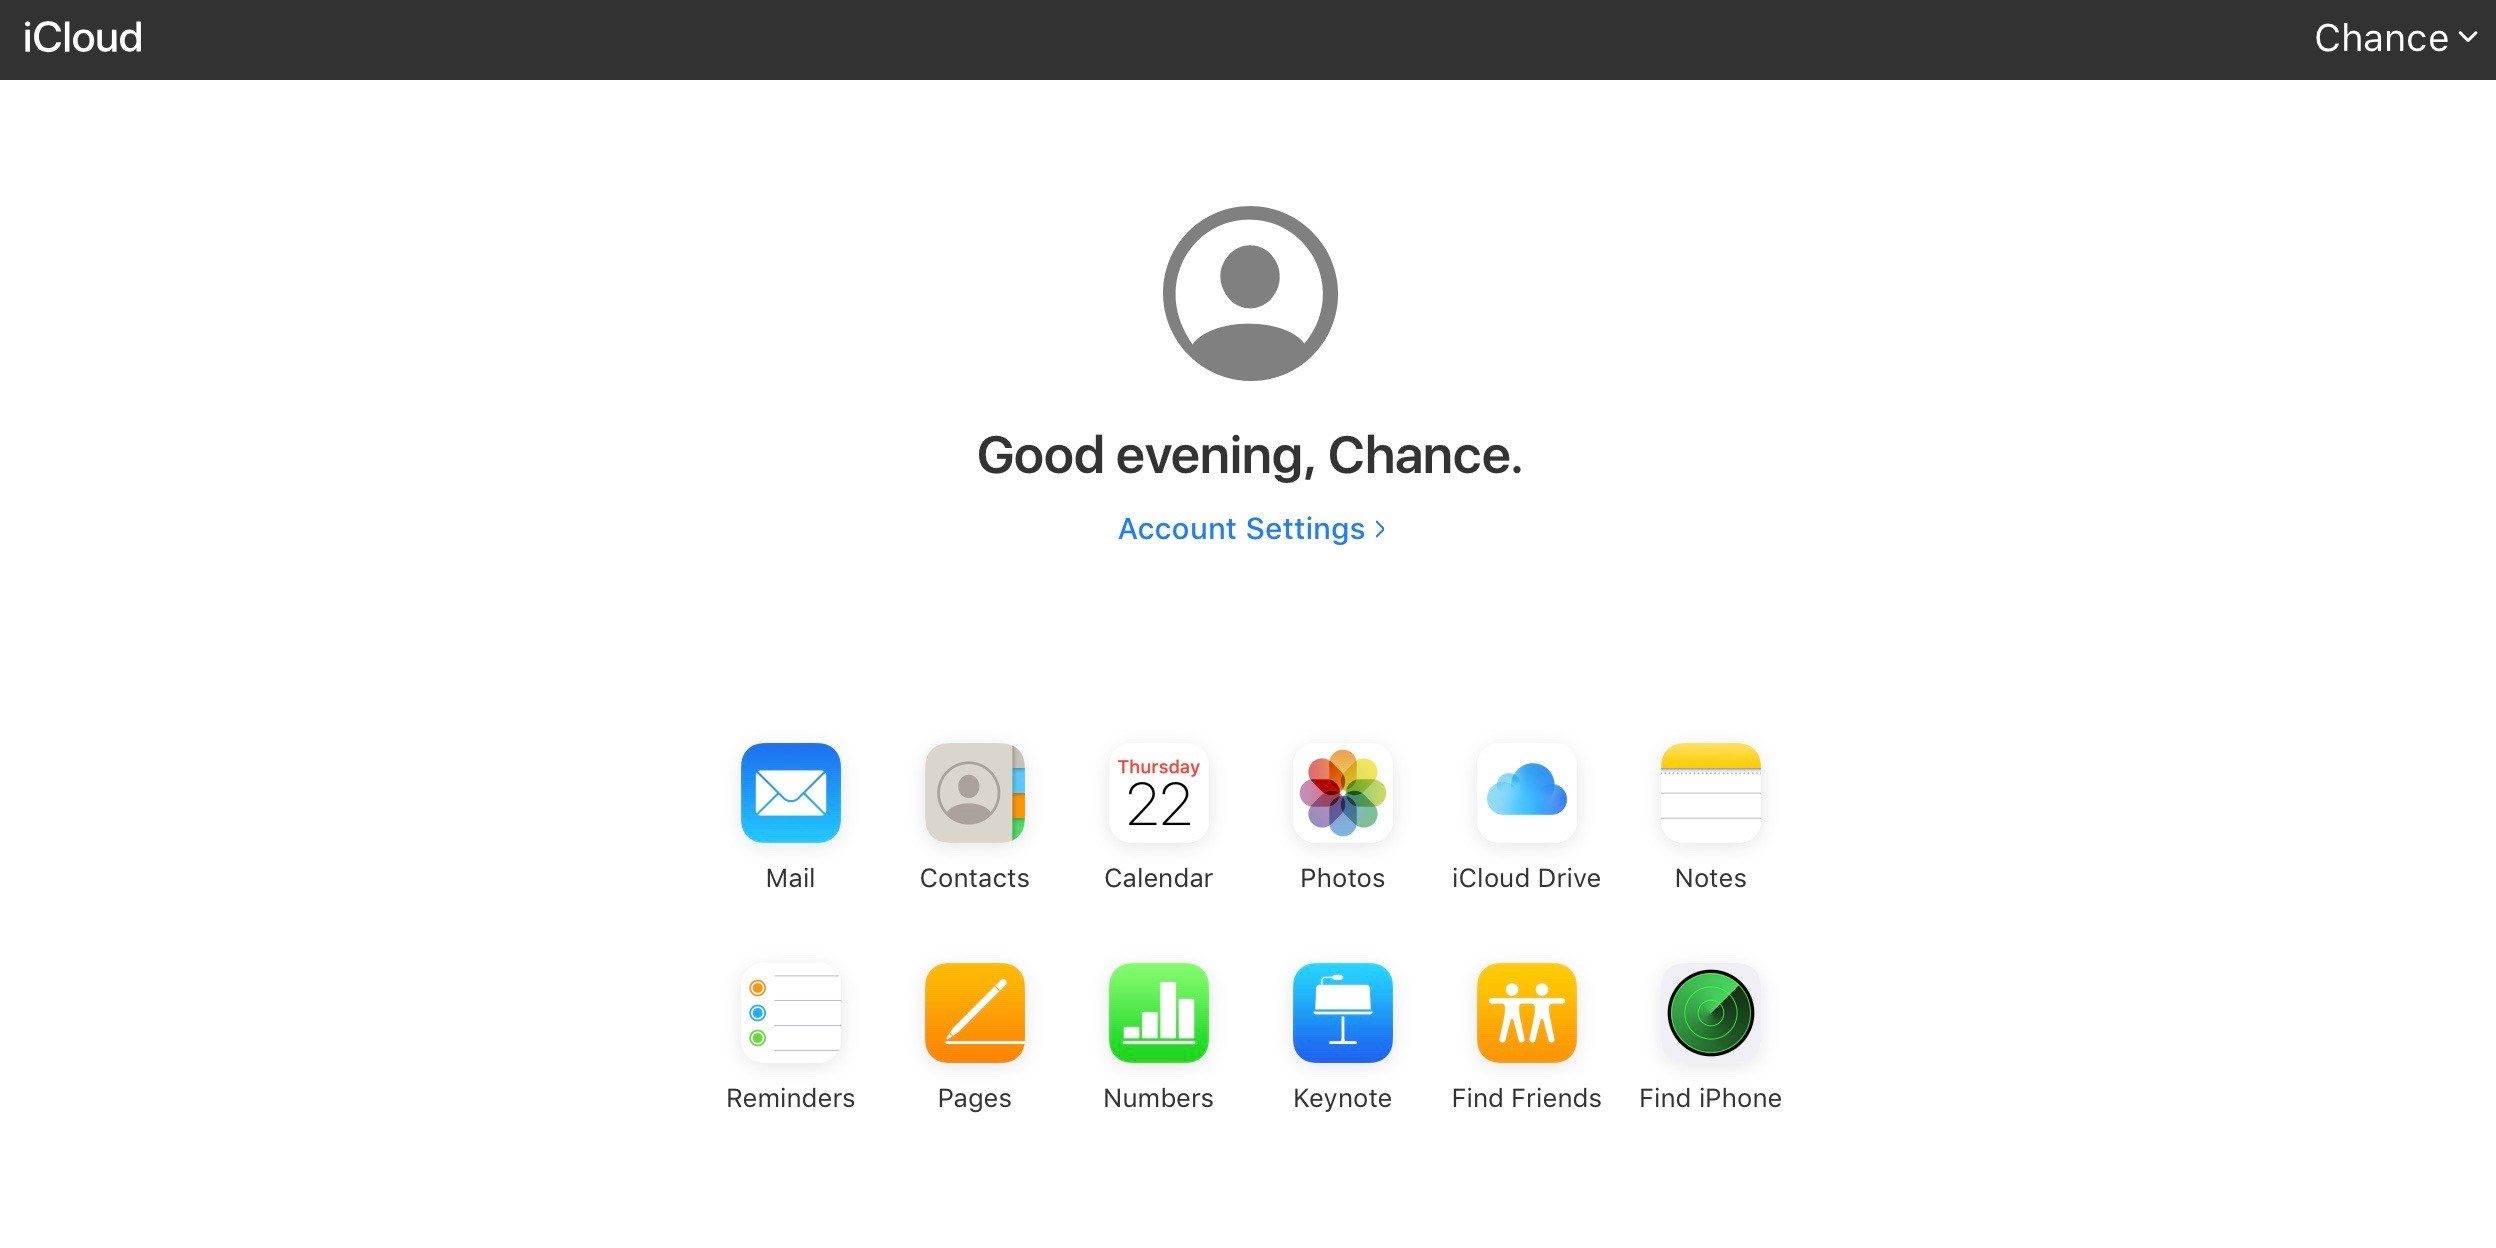 Apple Rolls out Redesigned iCloud Interface on the web in Beta with new Reminders app, more